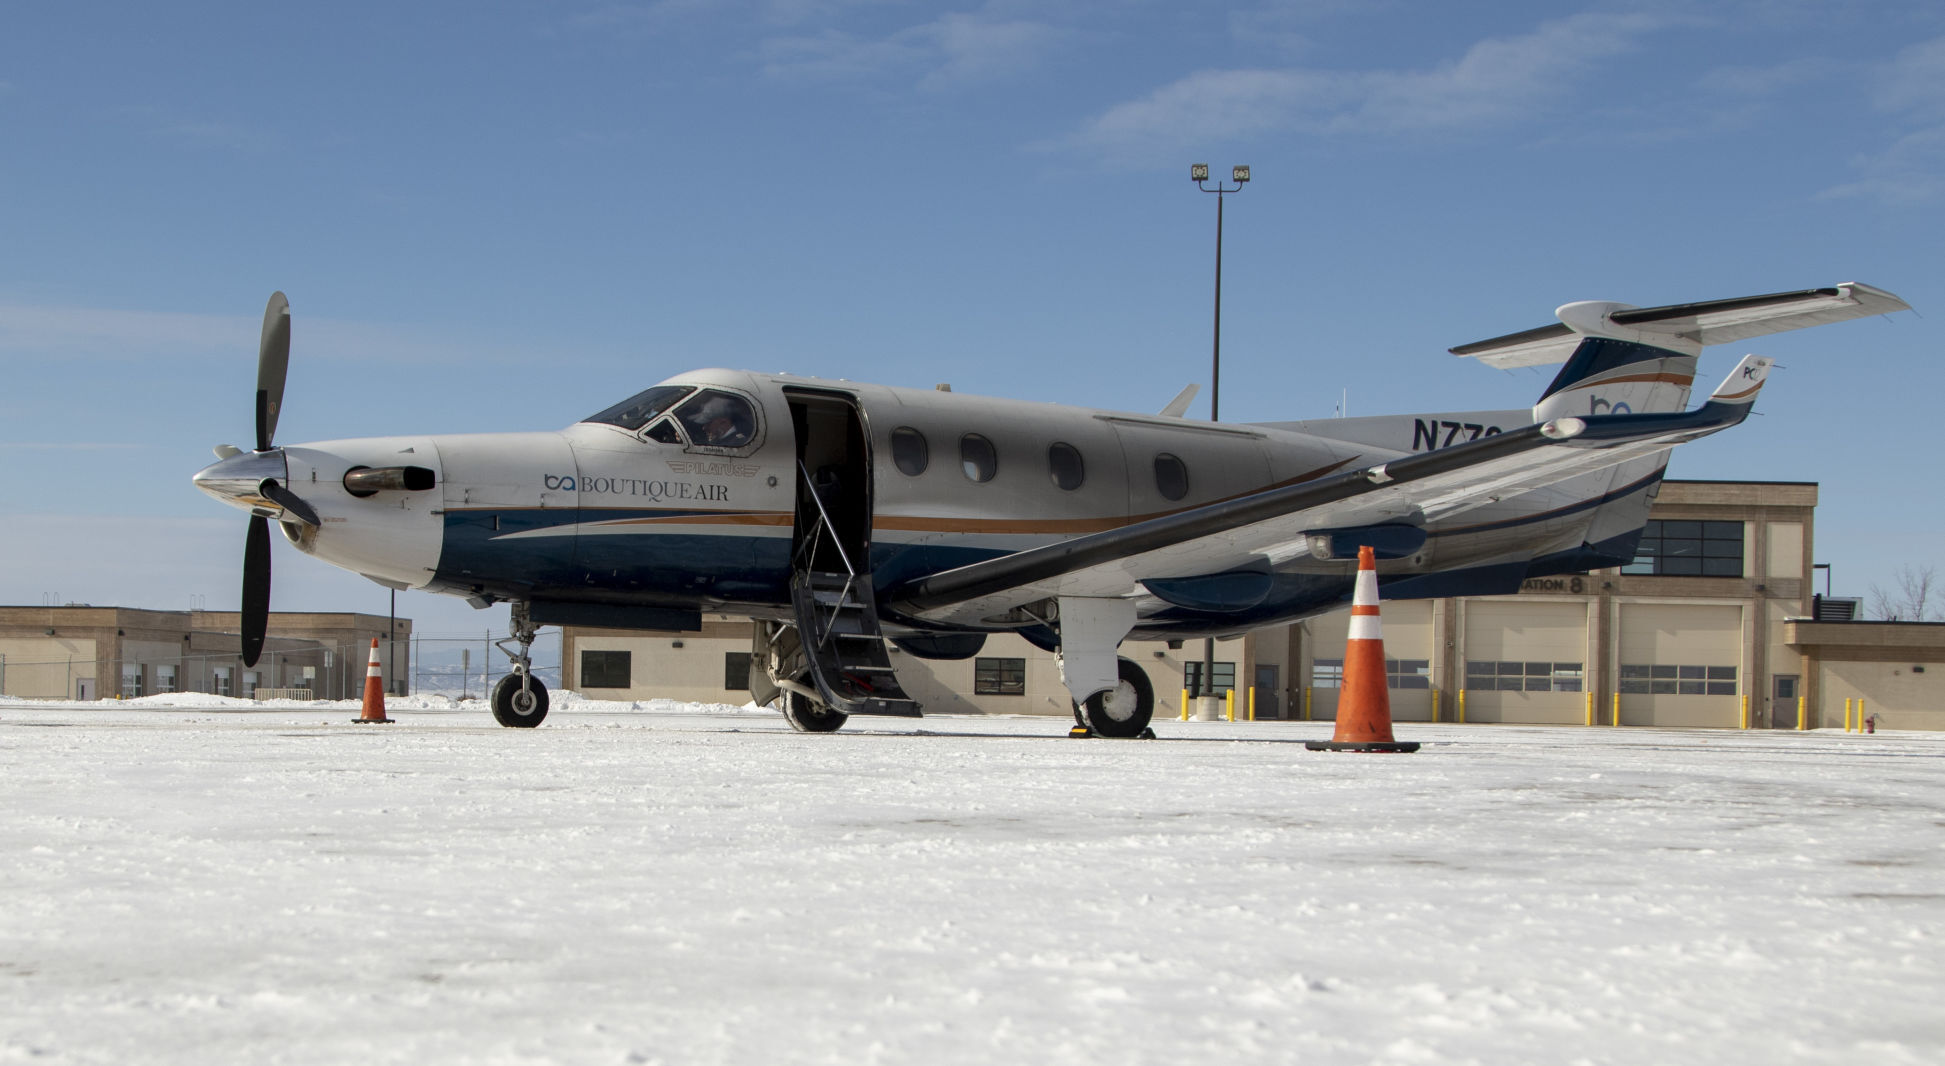 airlines that fly to rapid city regional airport